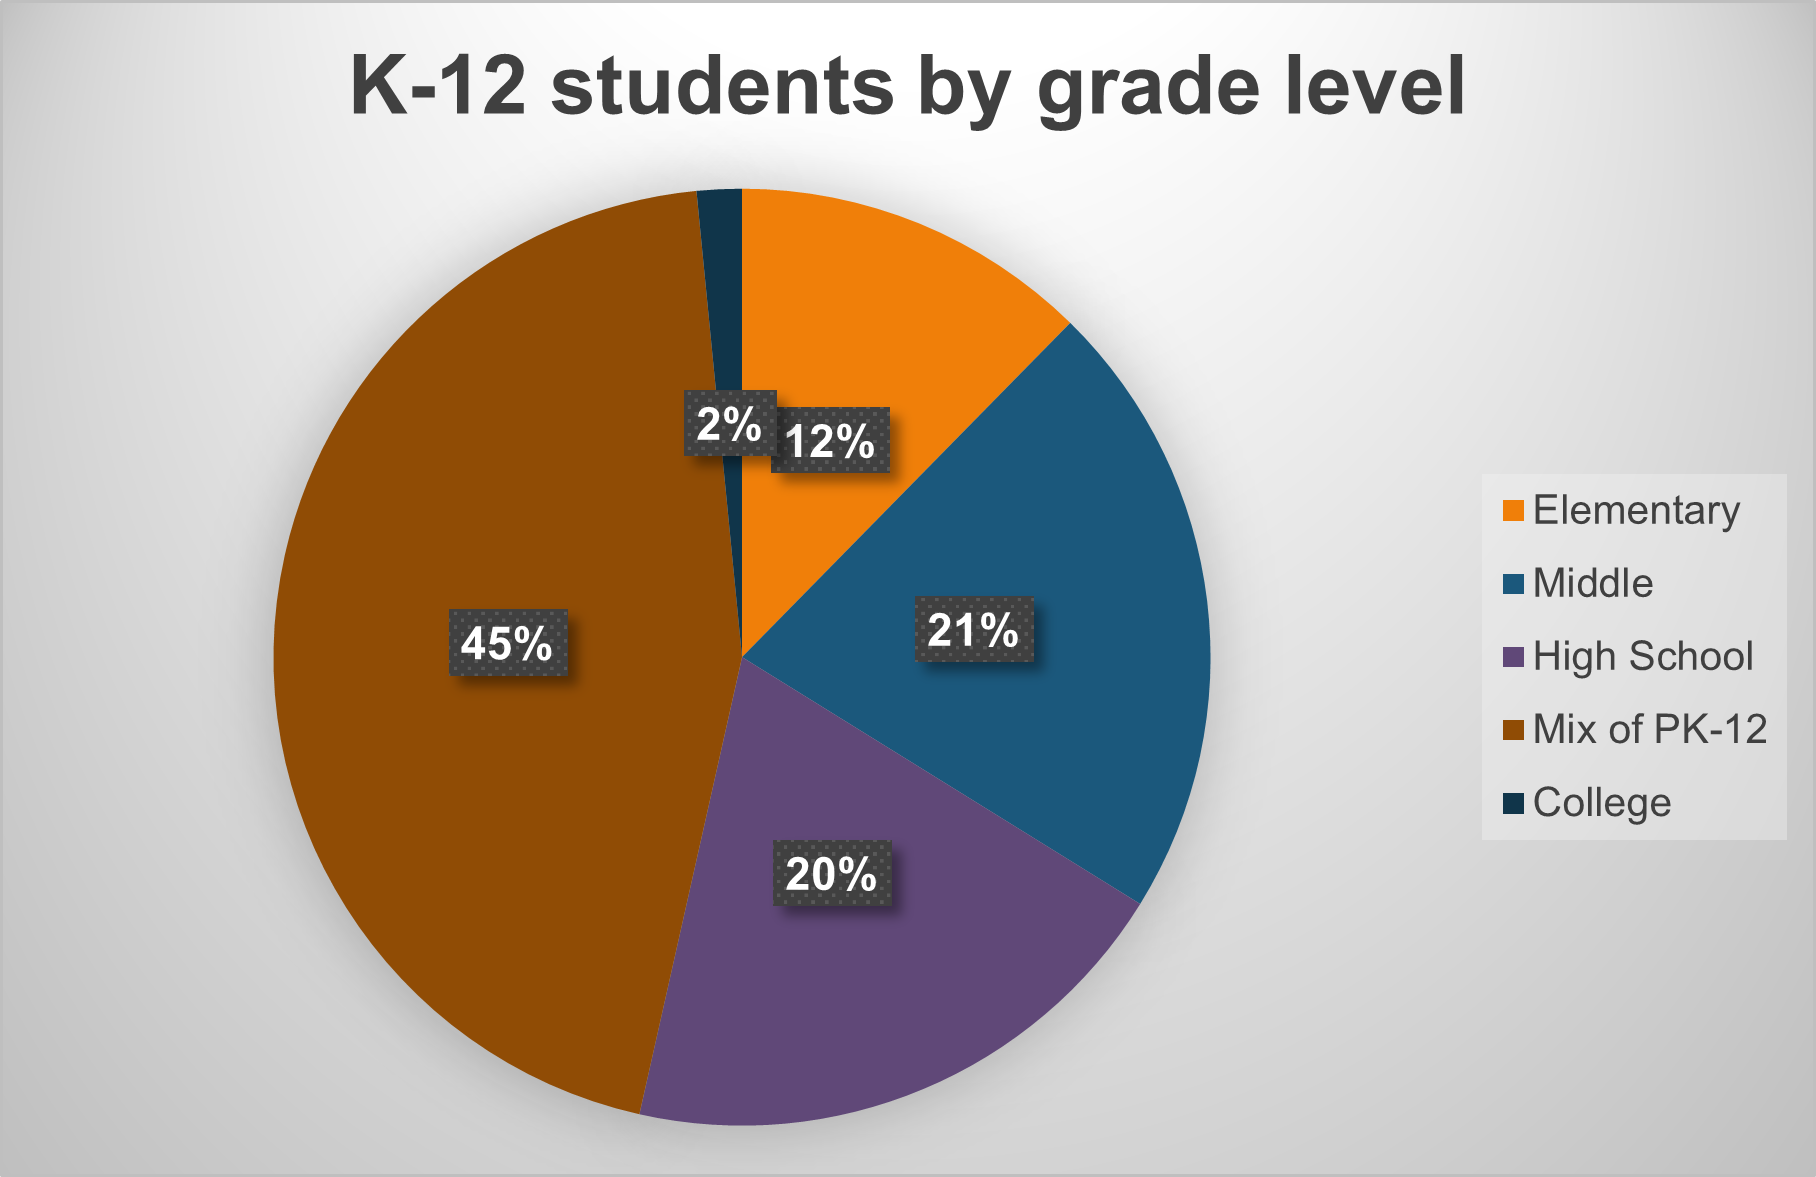 Shows 45% of the outreach was K-12, 21% was Middle Schoolers, 20% was high school, and 12% was elementary level